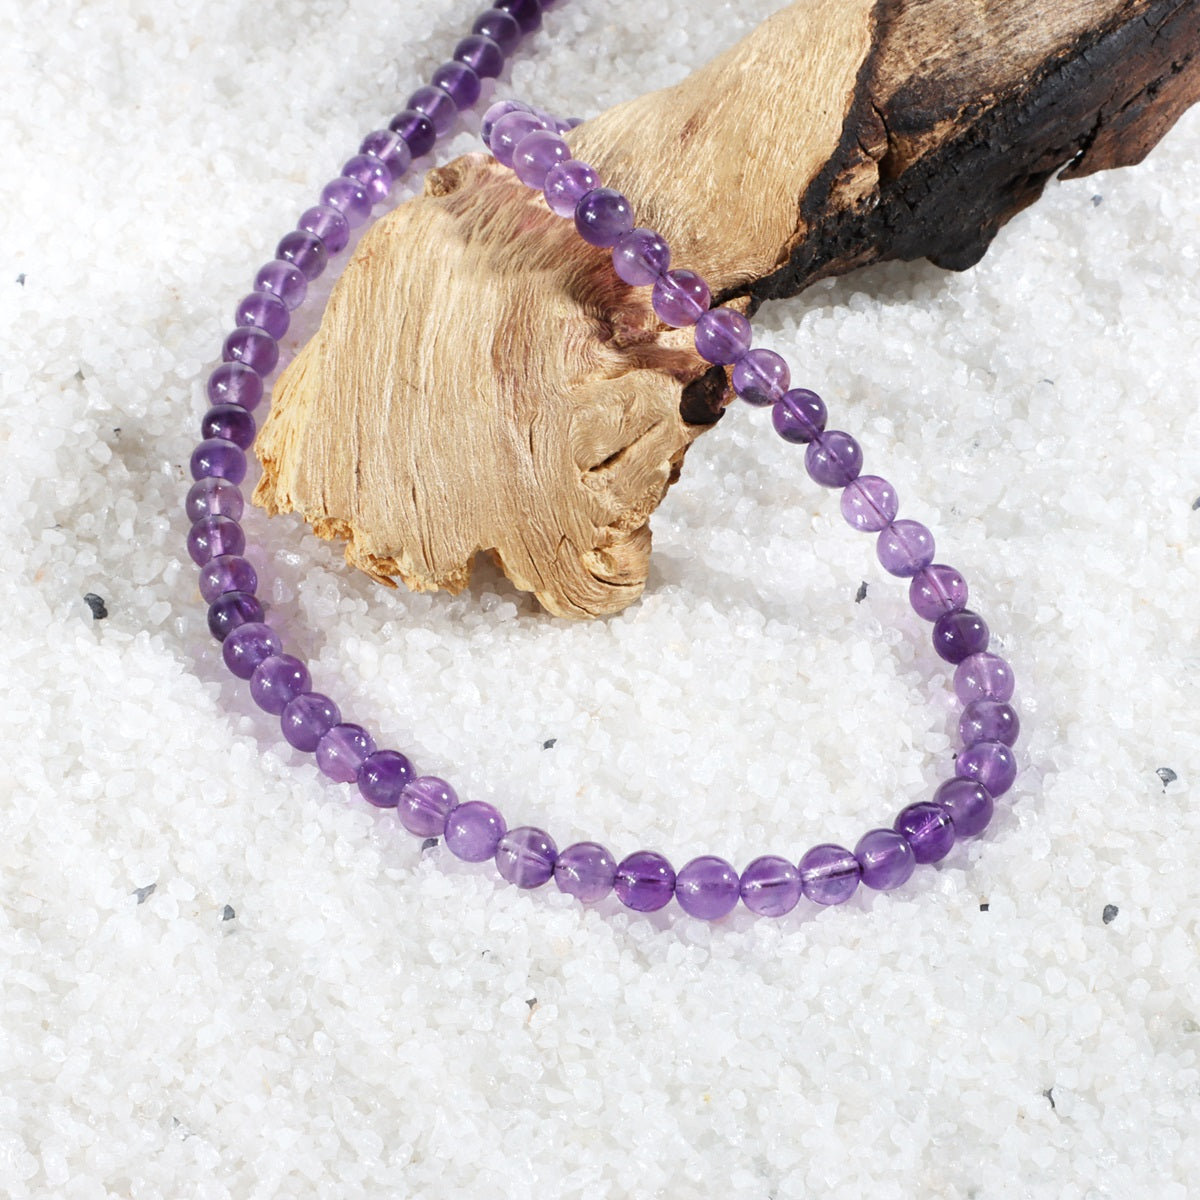 Men's Amethyst Gemstone Silver Necklace: Confident and stylish accessory